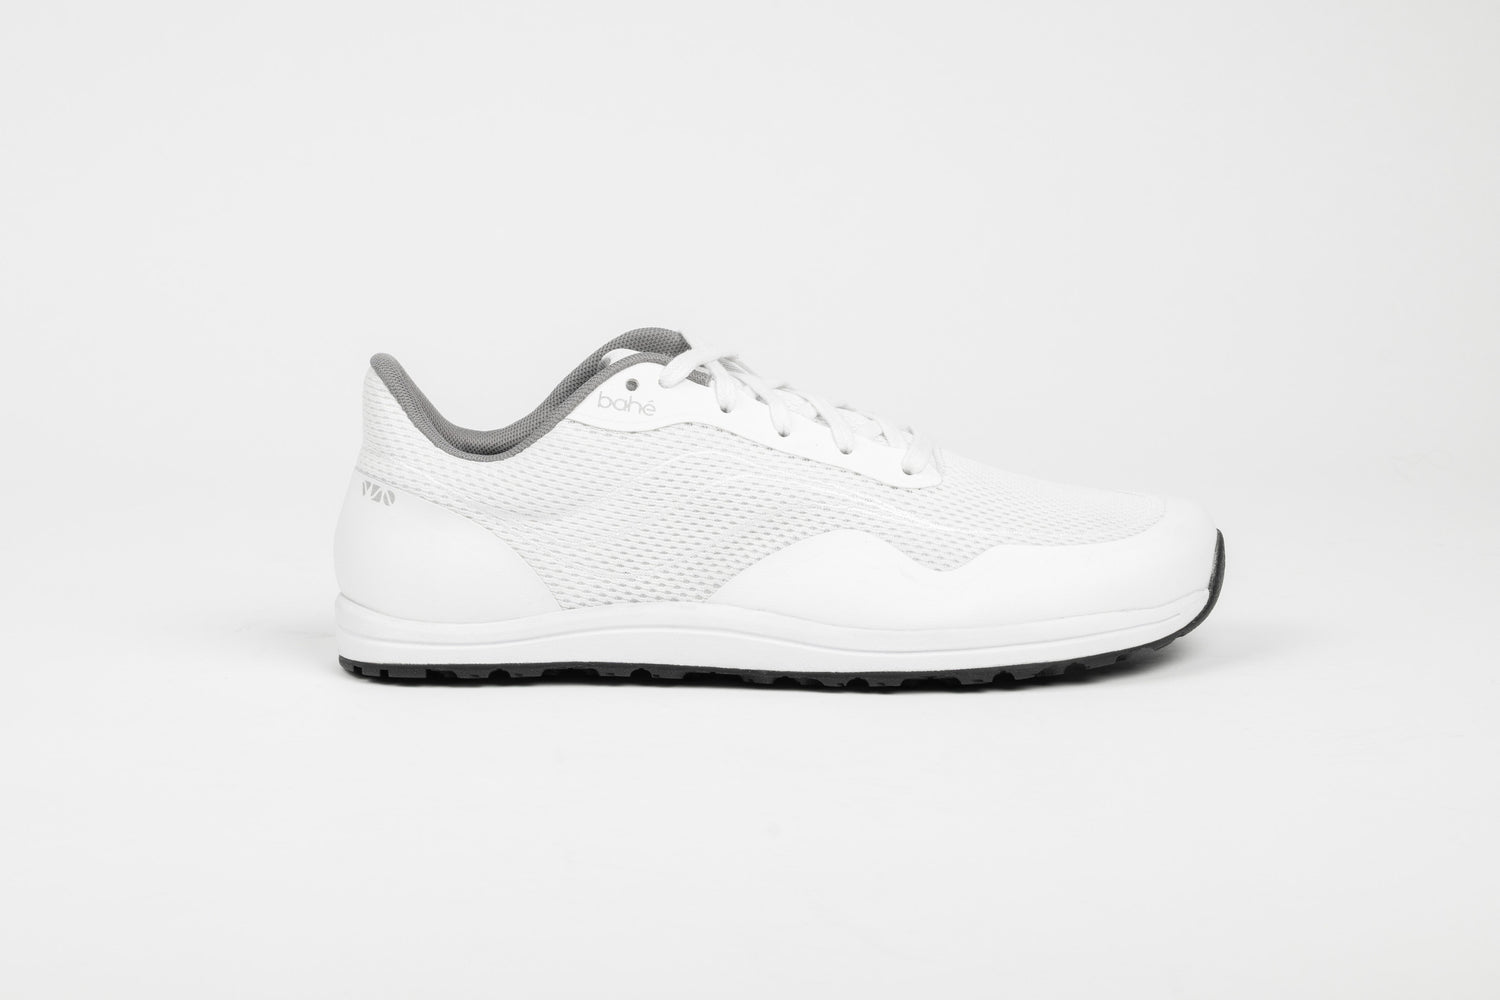 Profile view of Bahé Revive barefoot style grounding shoe in Frost (white)